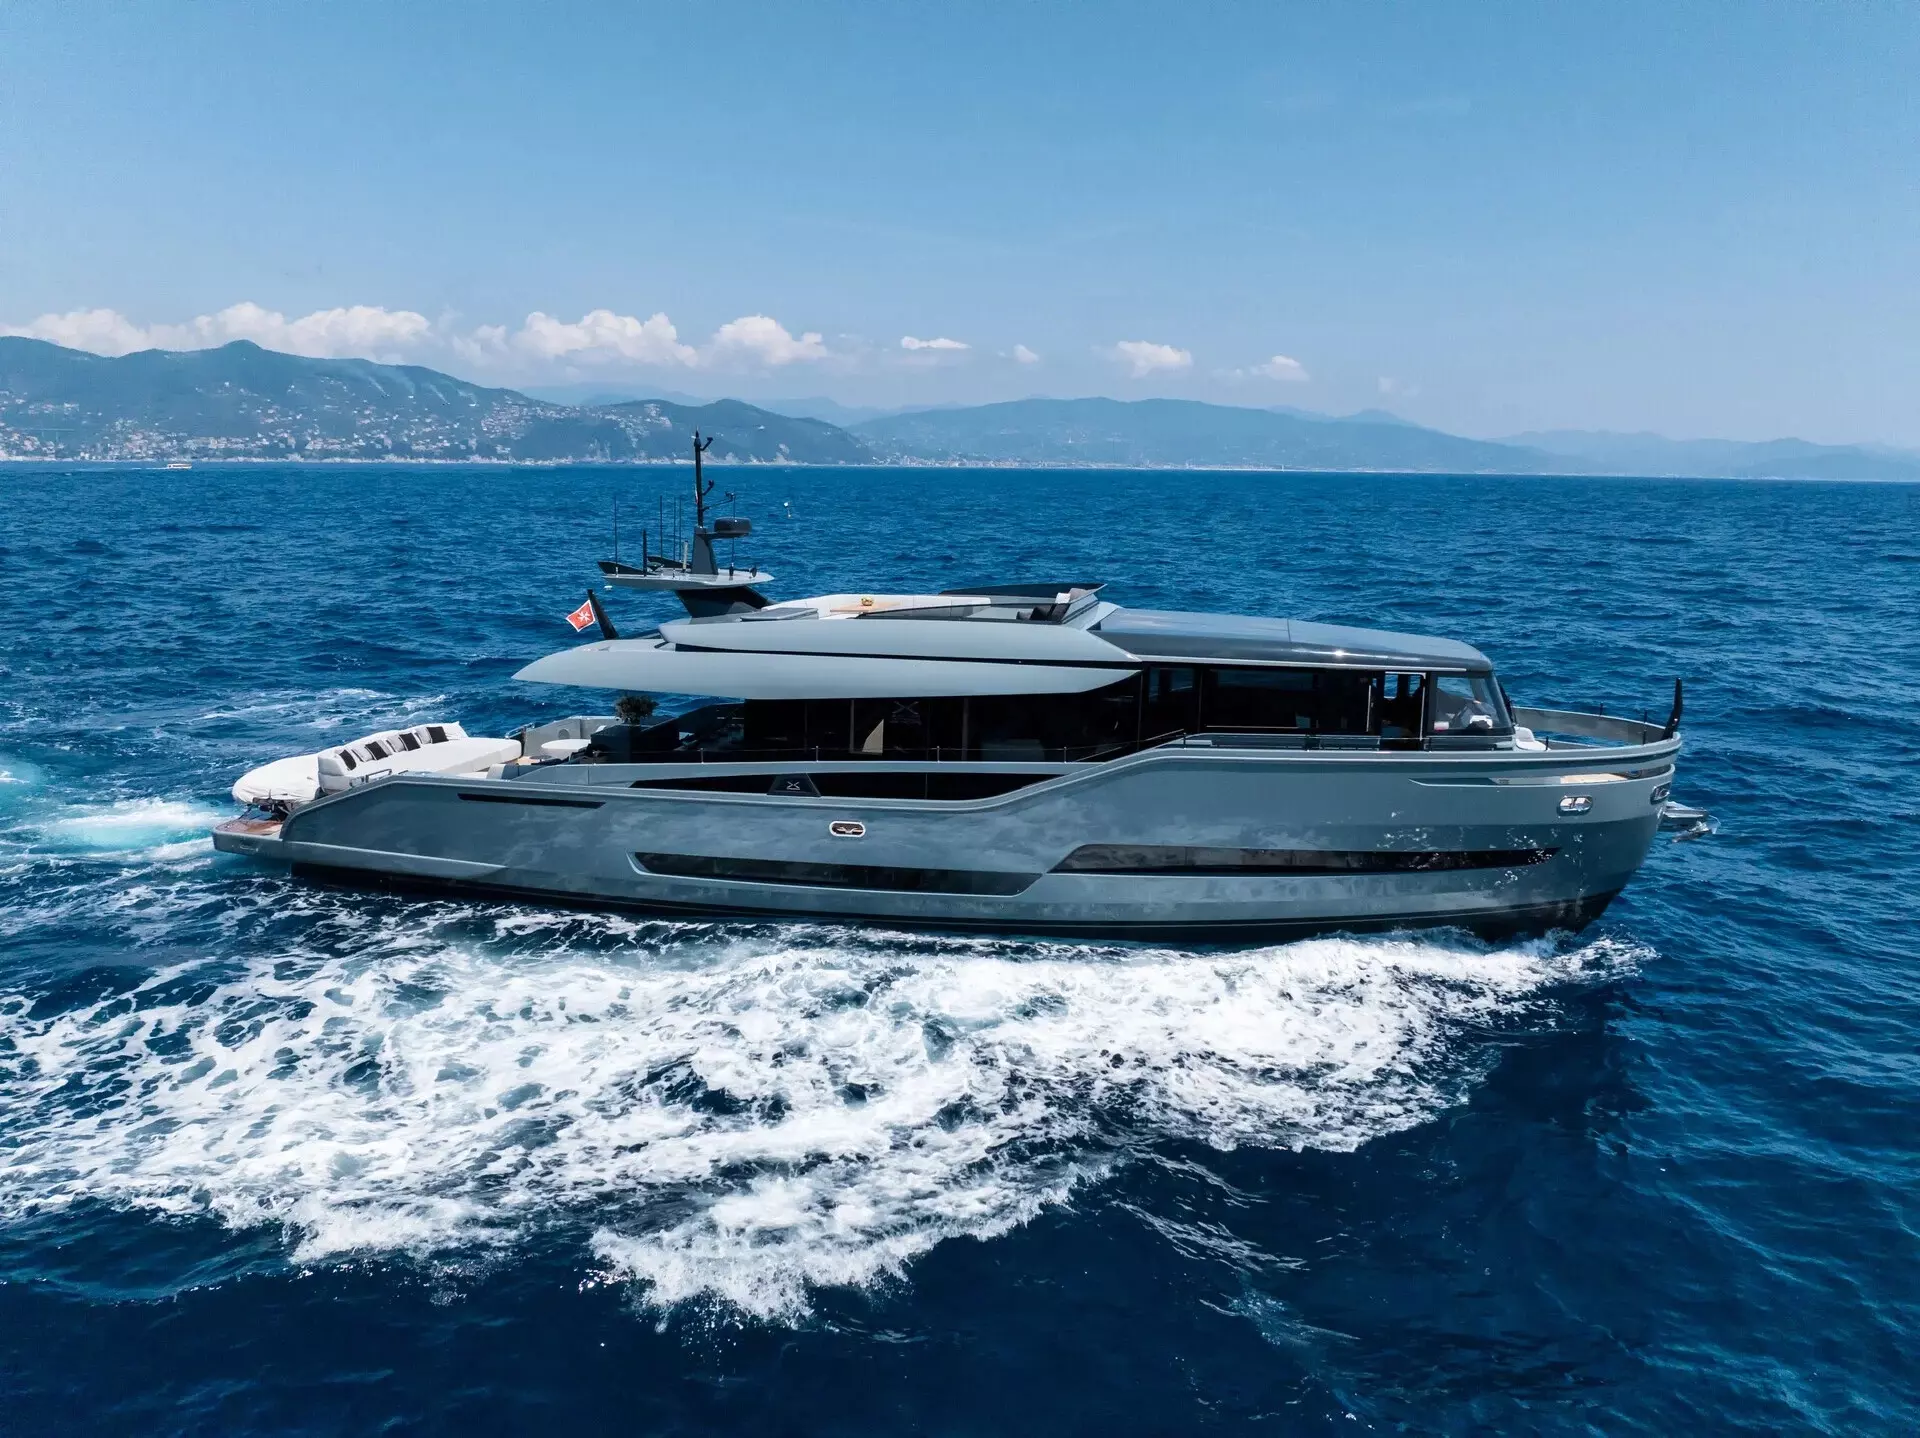 Martita by Palumbo - Special Offer for a private Motor Yacht Charter in Cannes with a crew